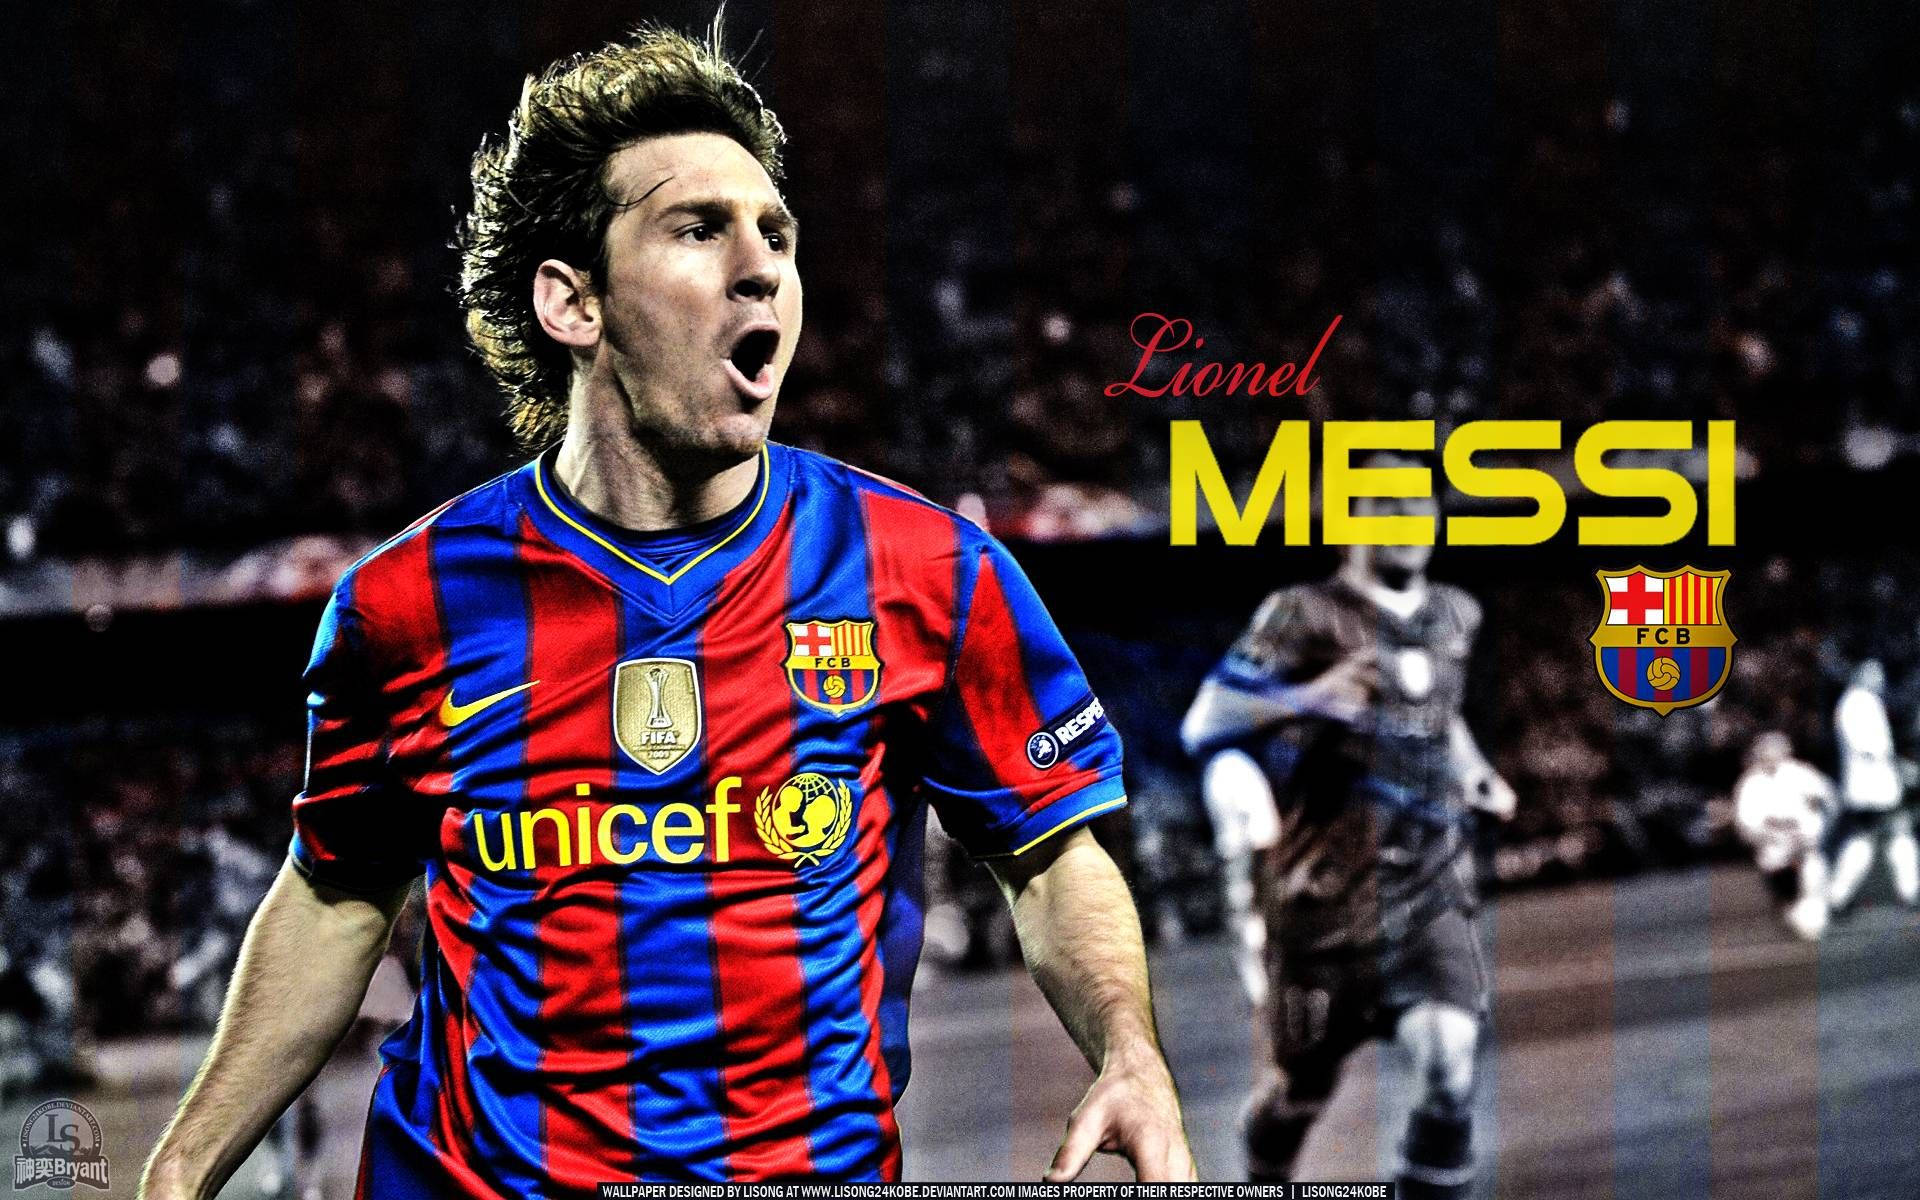 Cheering Messi Fcb Unicef Background